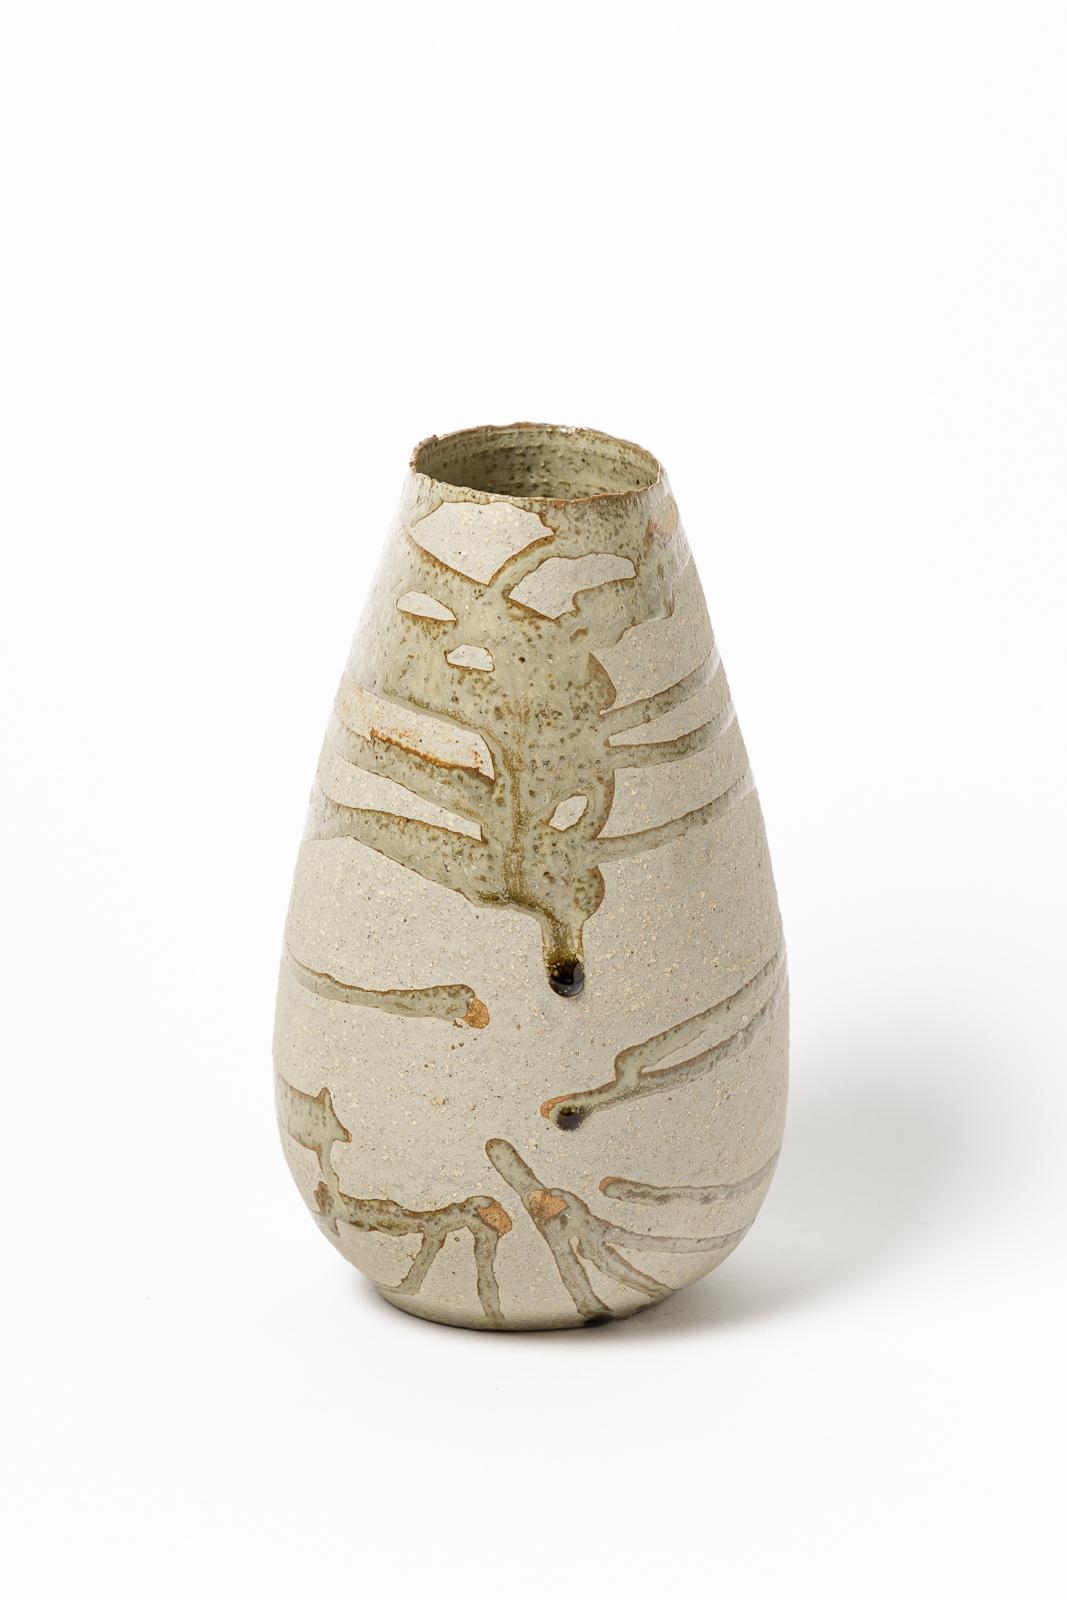 French Grey Abstract Stoneware Ceramic Vase circa 1970 by Jacques Lacheny 20th Century